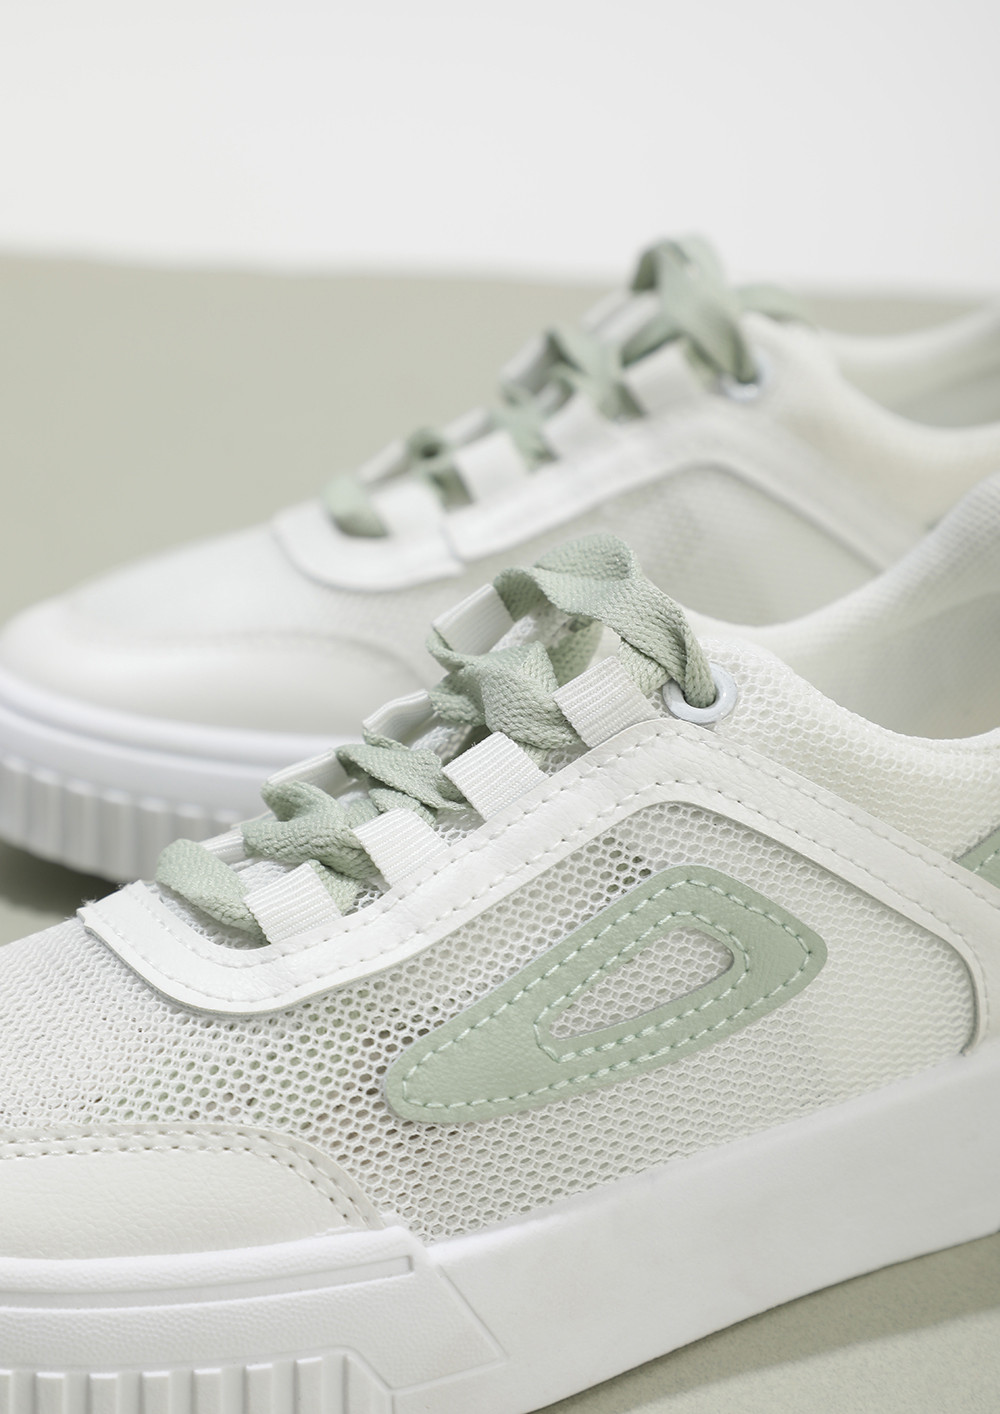 Autry Action Shoes WMNS MEDALIST LOW Green/White | BSTN Store